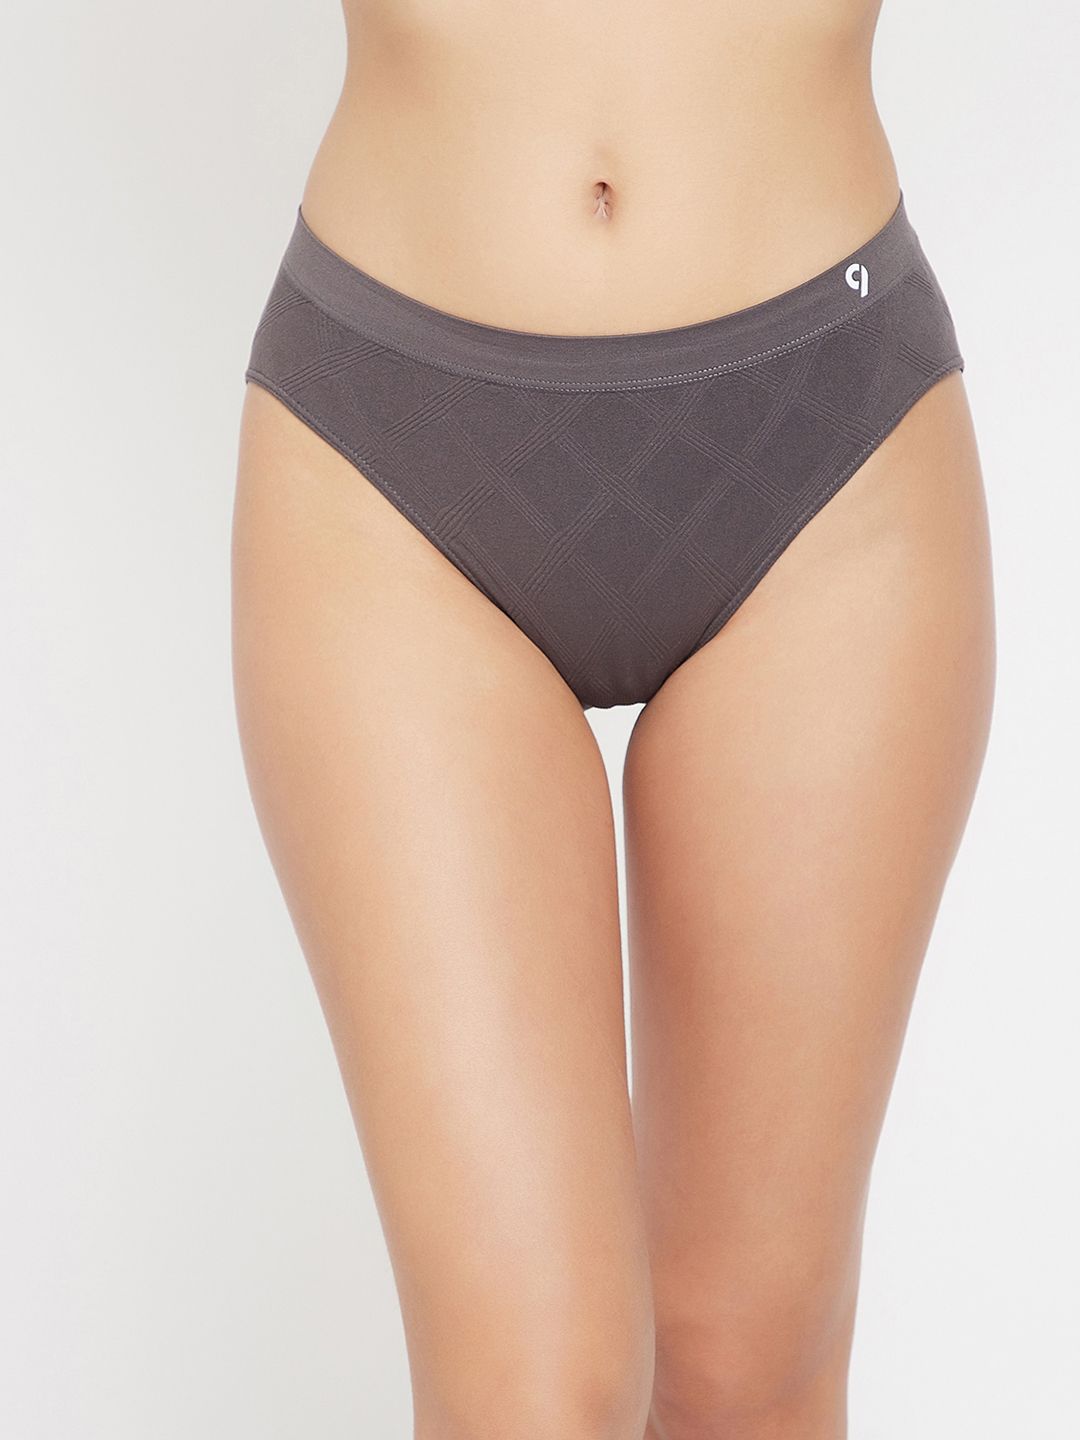 Shop a Variety of Women's Assorted Panties – C9 Airwear